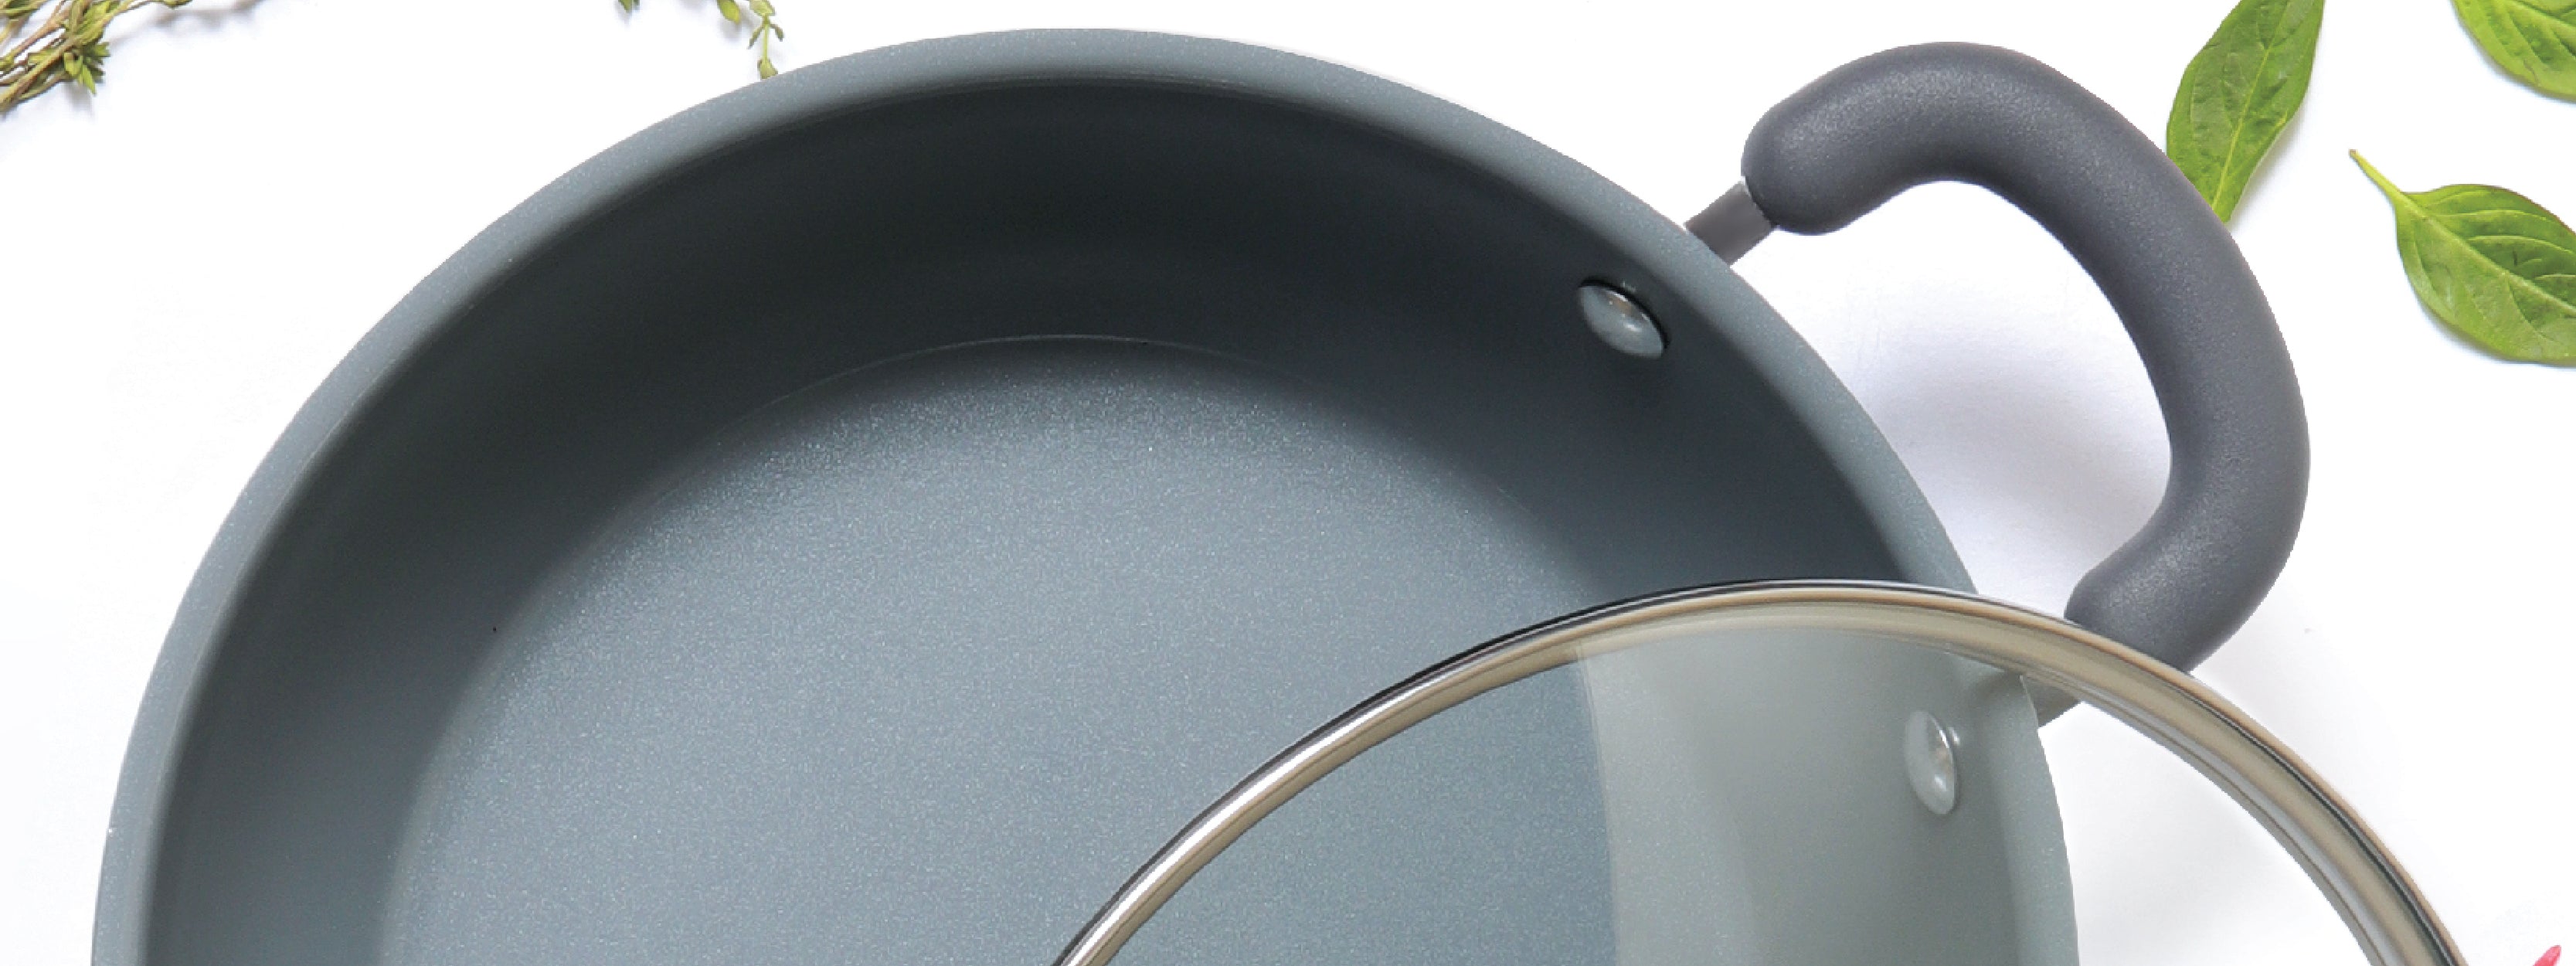 Blog - PFAS-Free Cooking Guide - How to Cook Non-stick with Stainless  Steel, Cast Iron, and Ceramic Nonstick Cookware